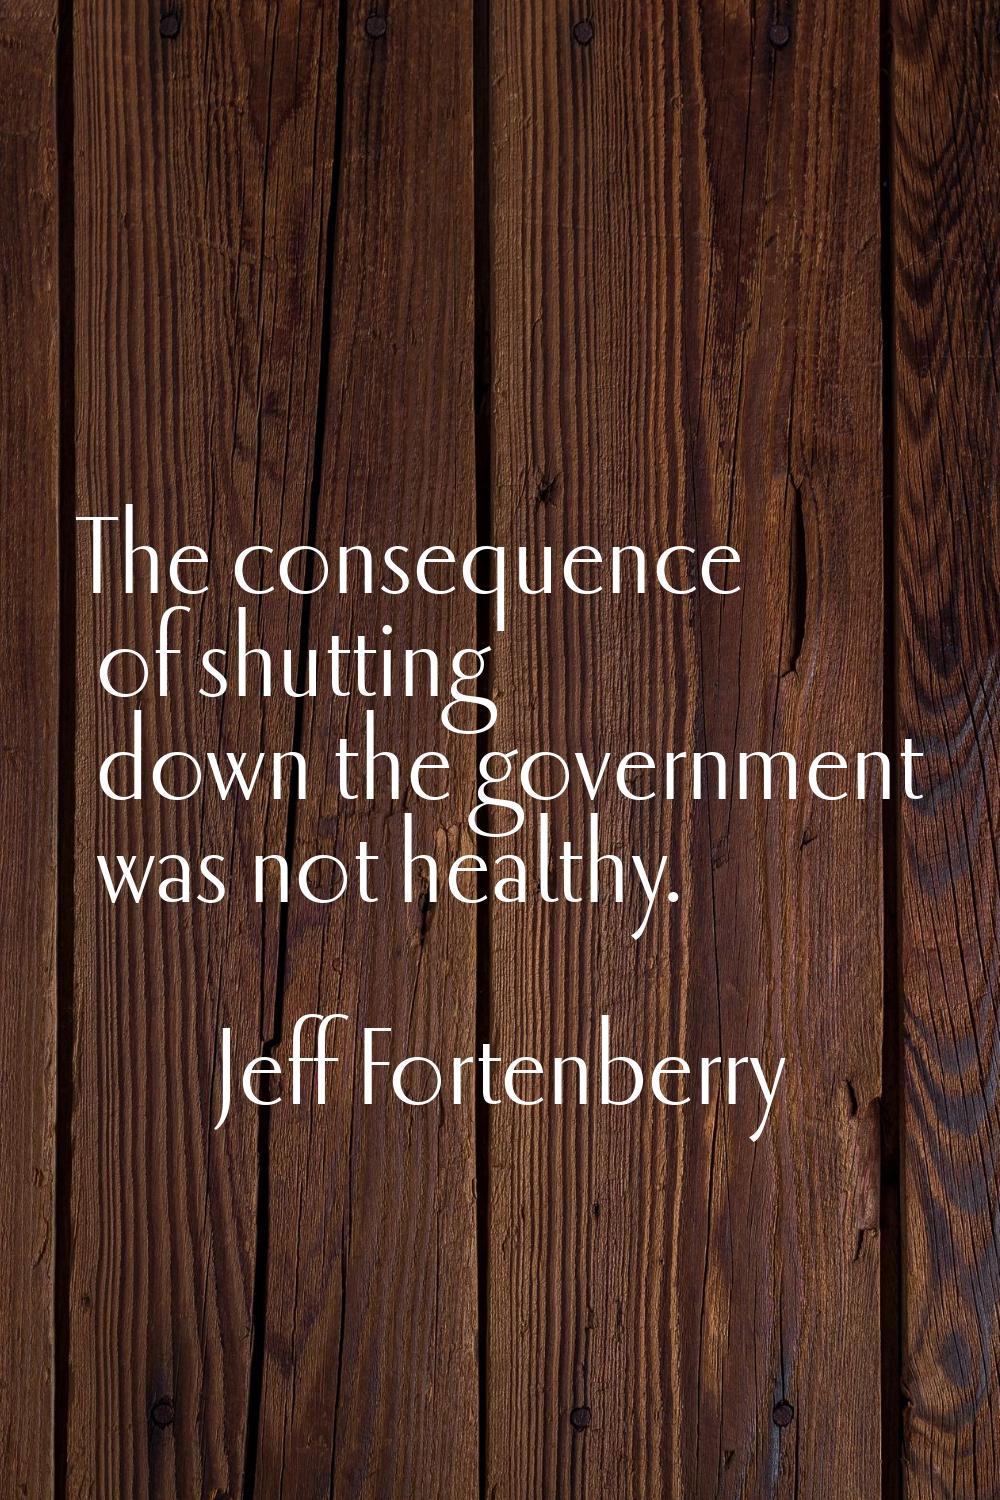 The consequence of shutting down the government was not healthy.